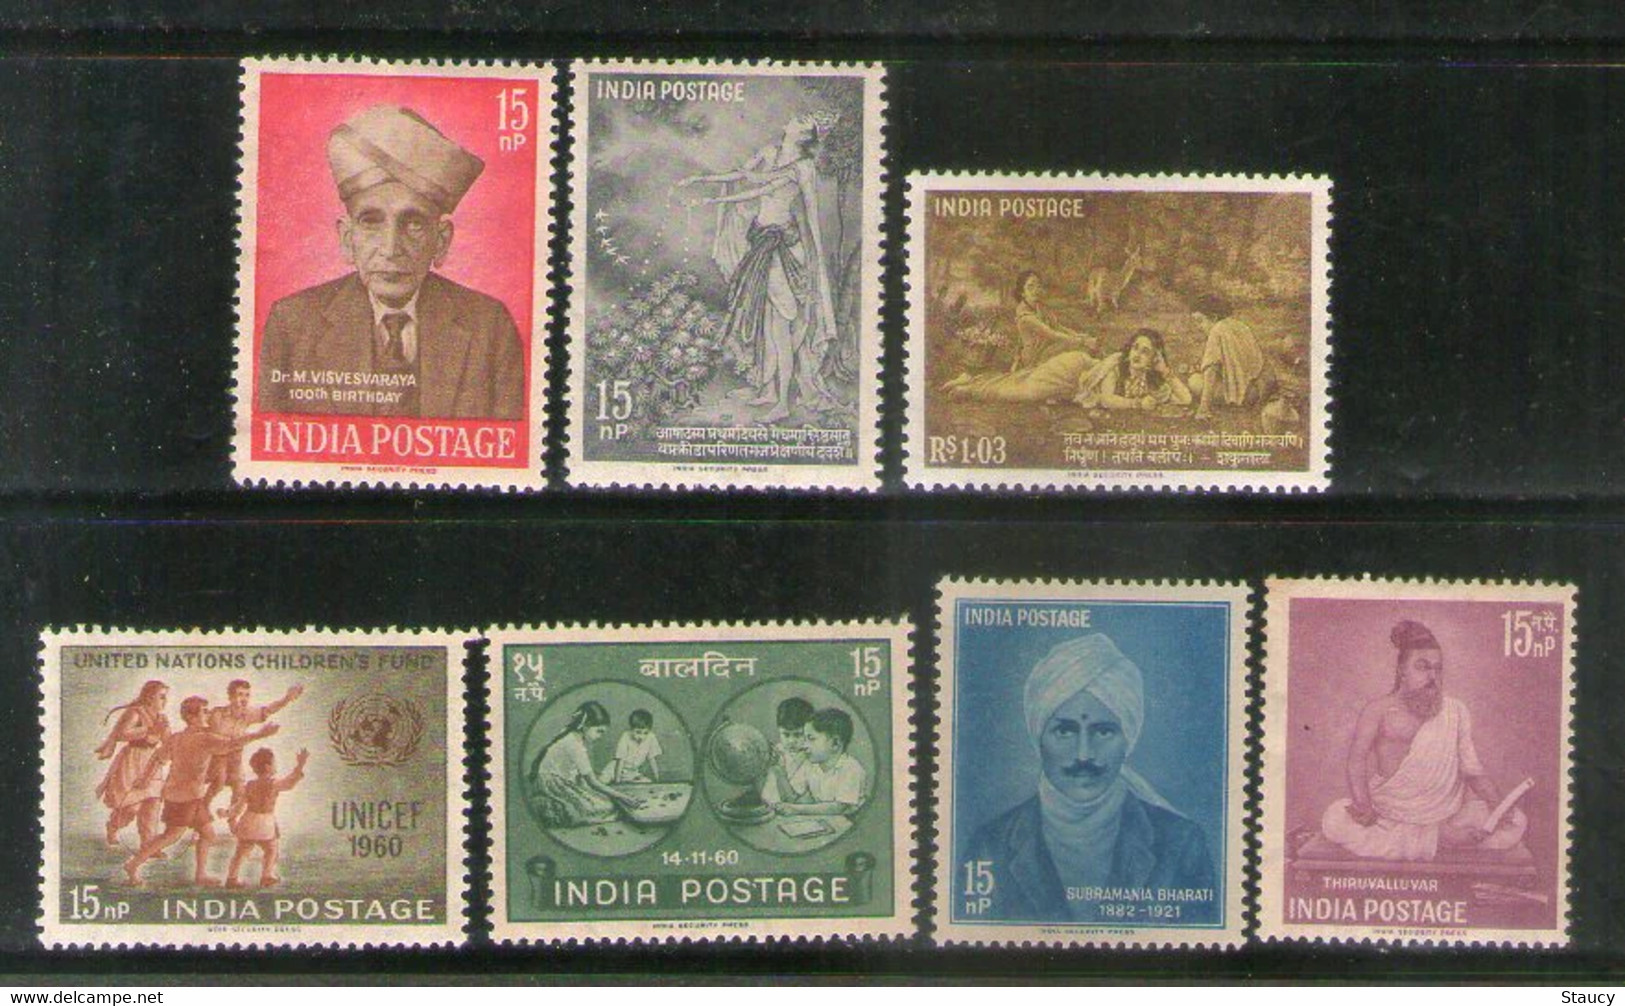 India 1960 Complete Year Pack / Set / Collection Total 7 Stamps (No Missing) MNH As Per Scan - Années Complètes